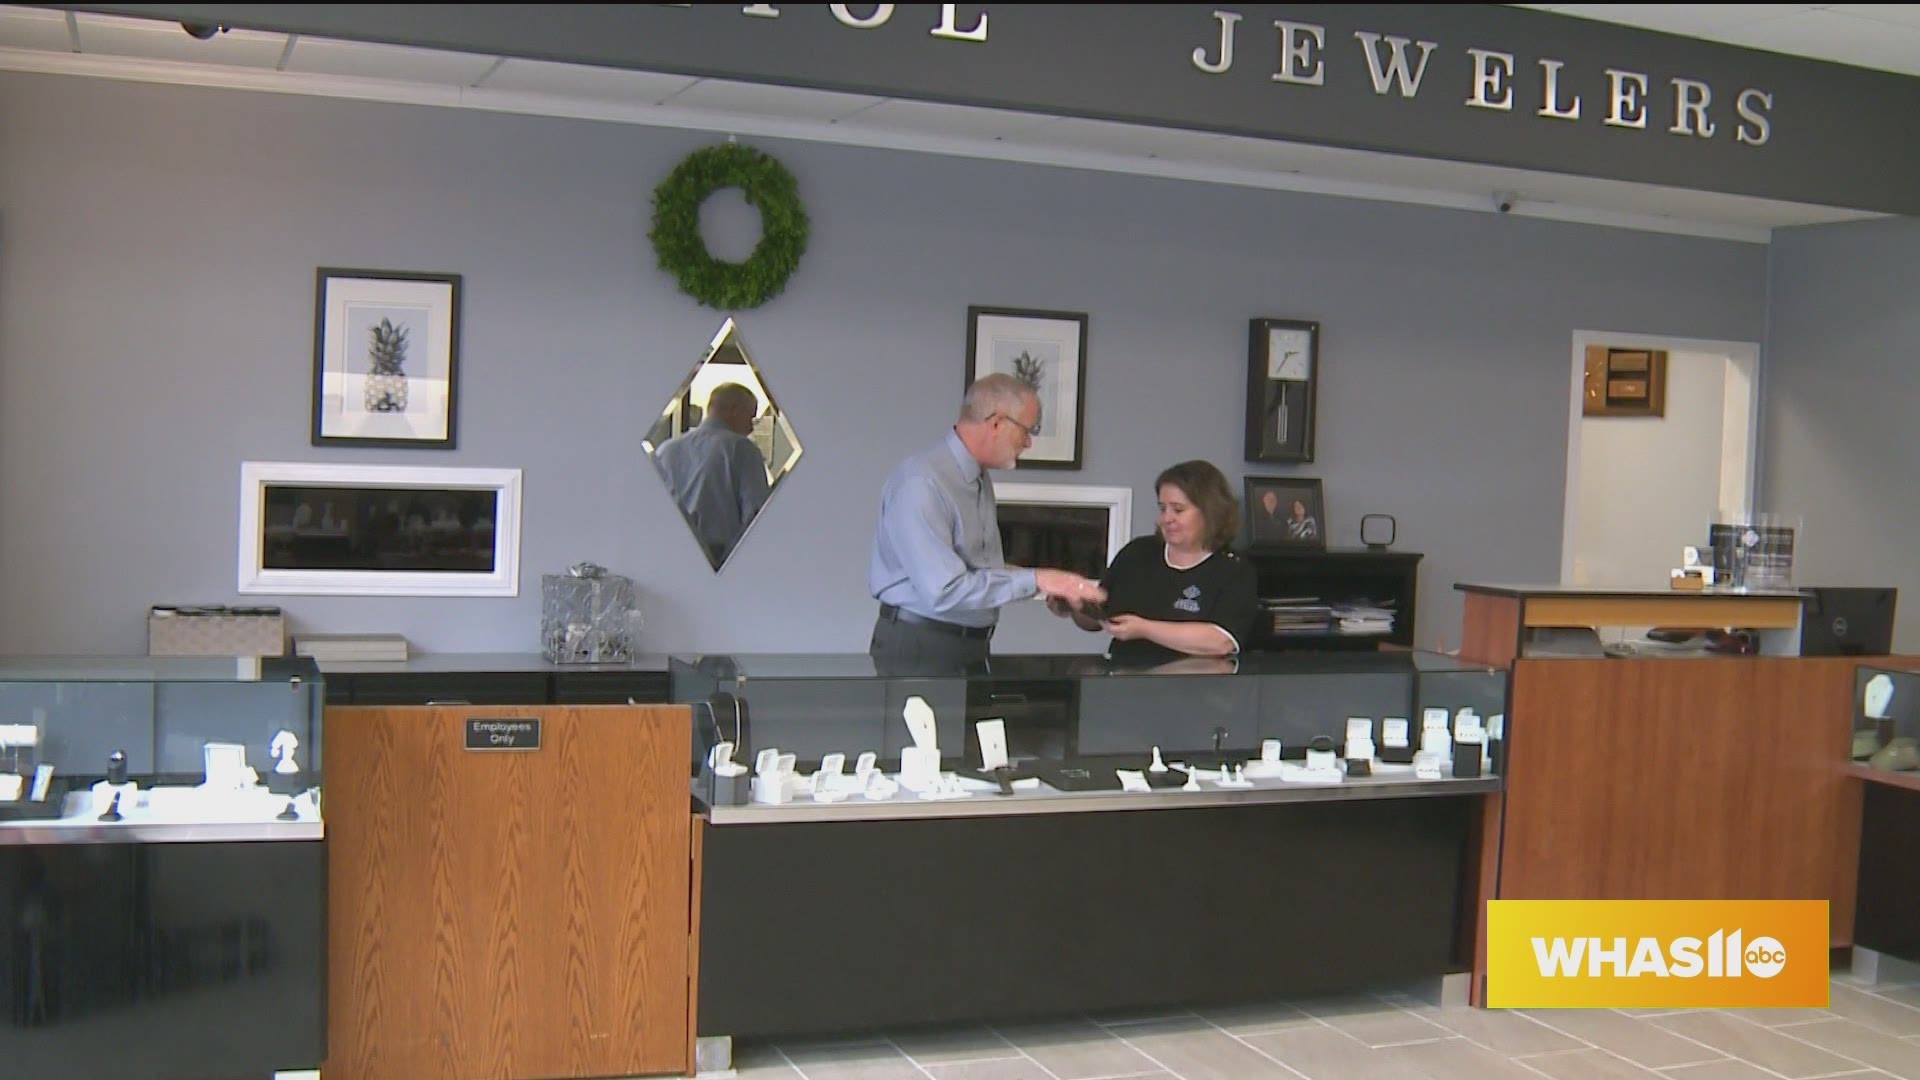 Capitol Jewelers is located at 101 E Chestnut Street in Corydon, IN. For more information, call 812-738-3853 or visit shopcapitoljewelers.com.